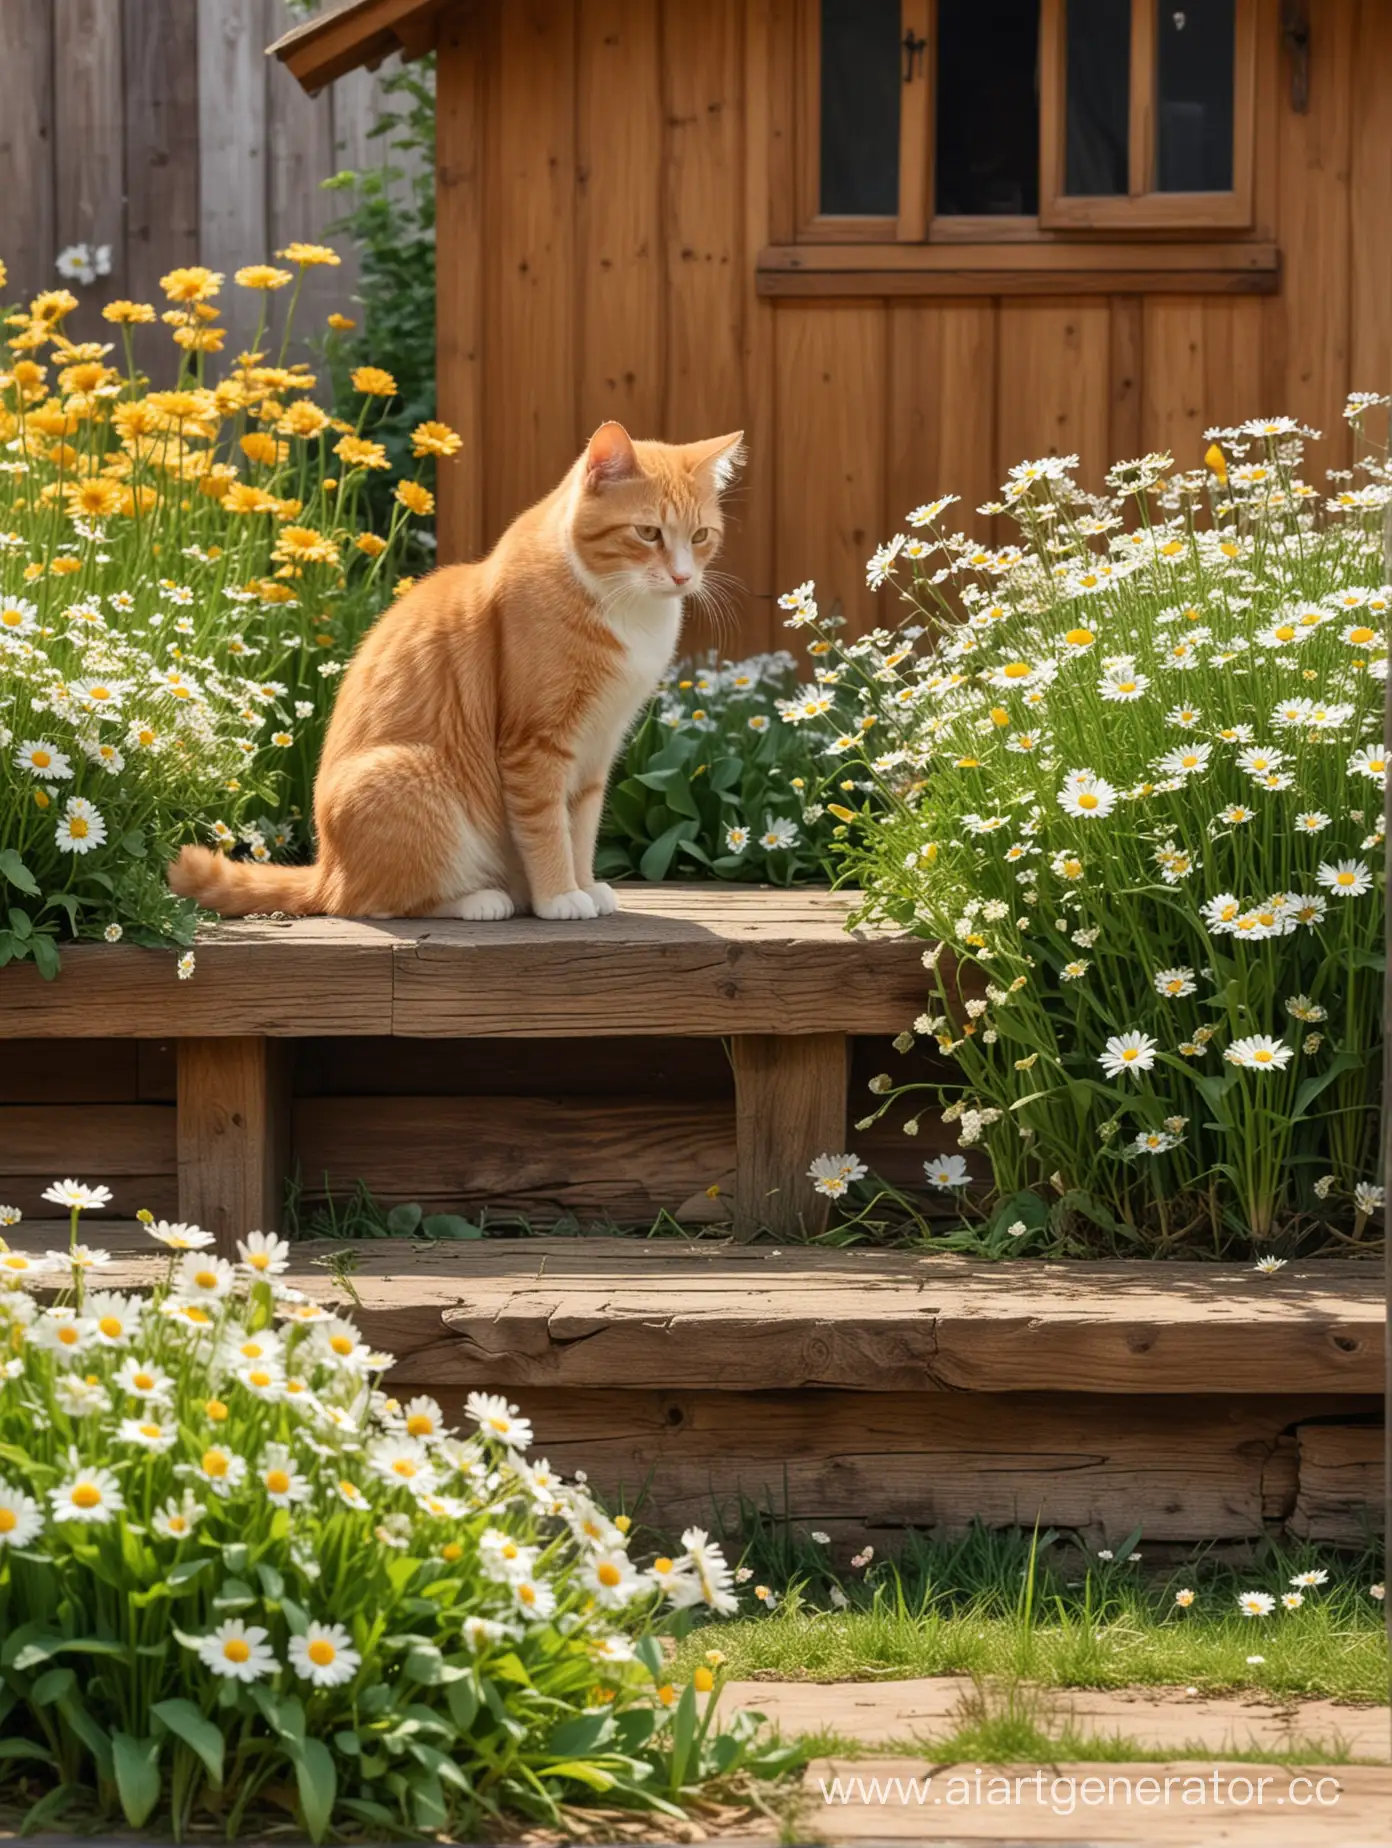 Boy-with-Ginger-Cat-and-Daisies-near-a-Blurred-Wooden-House